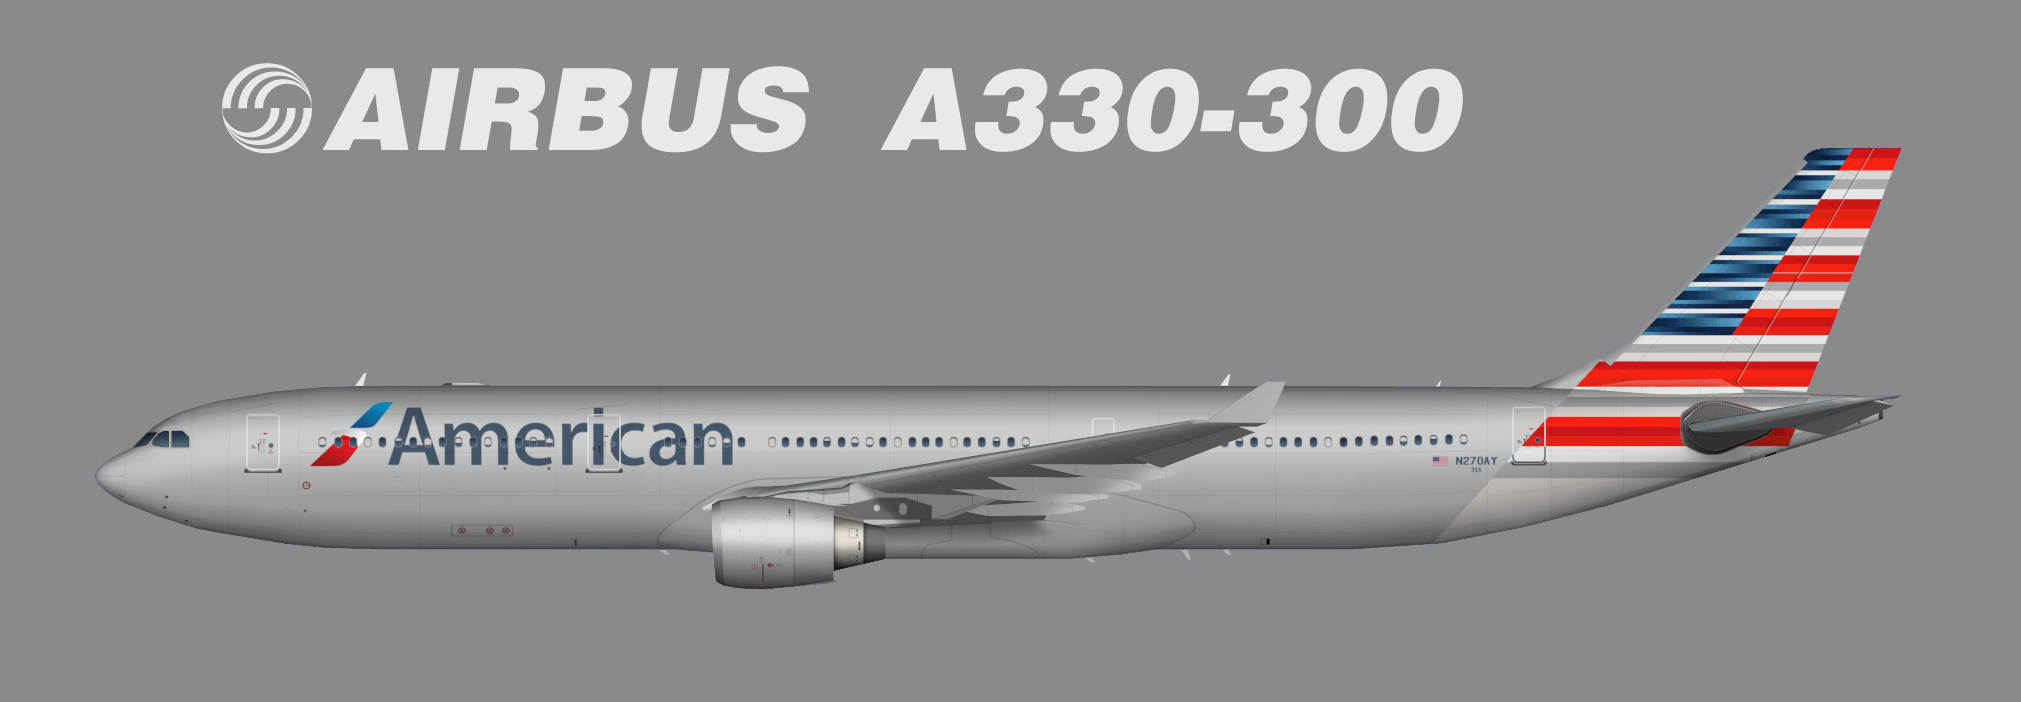 American Airlines Airbus A330-300 – Juergen's paint hangar